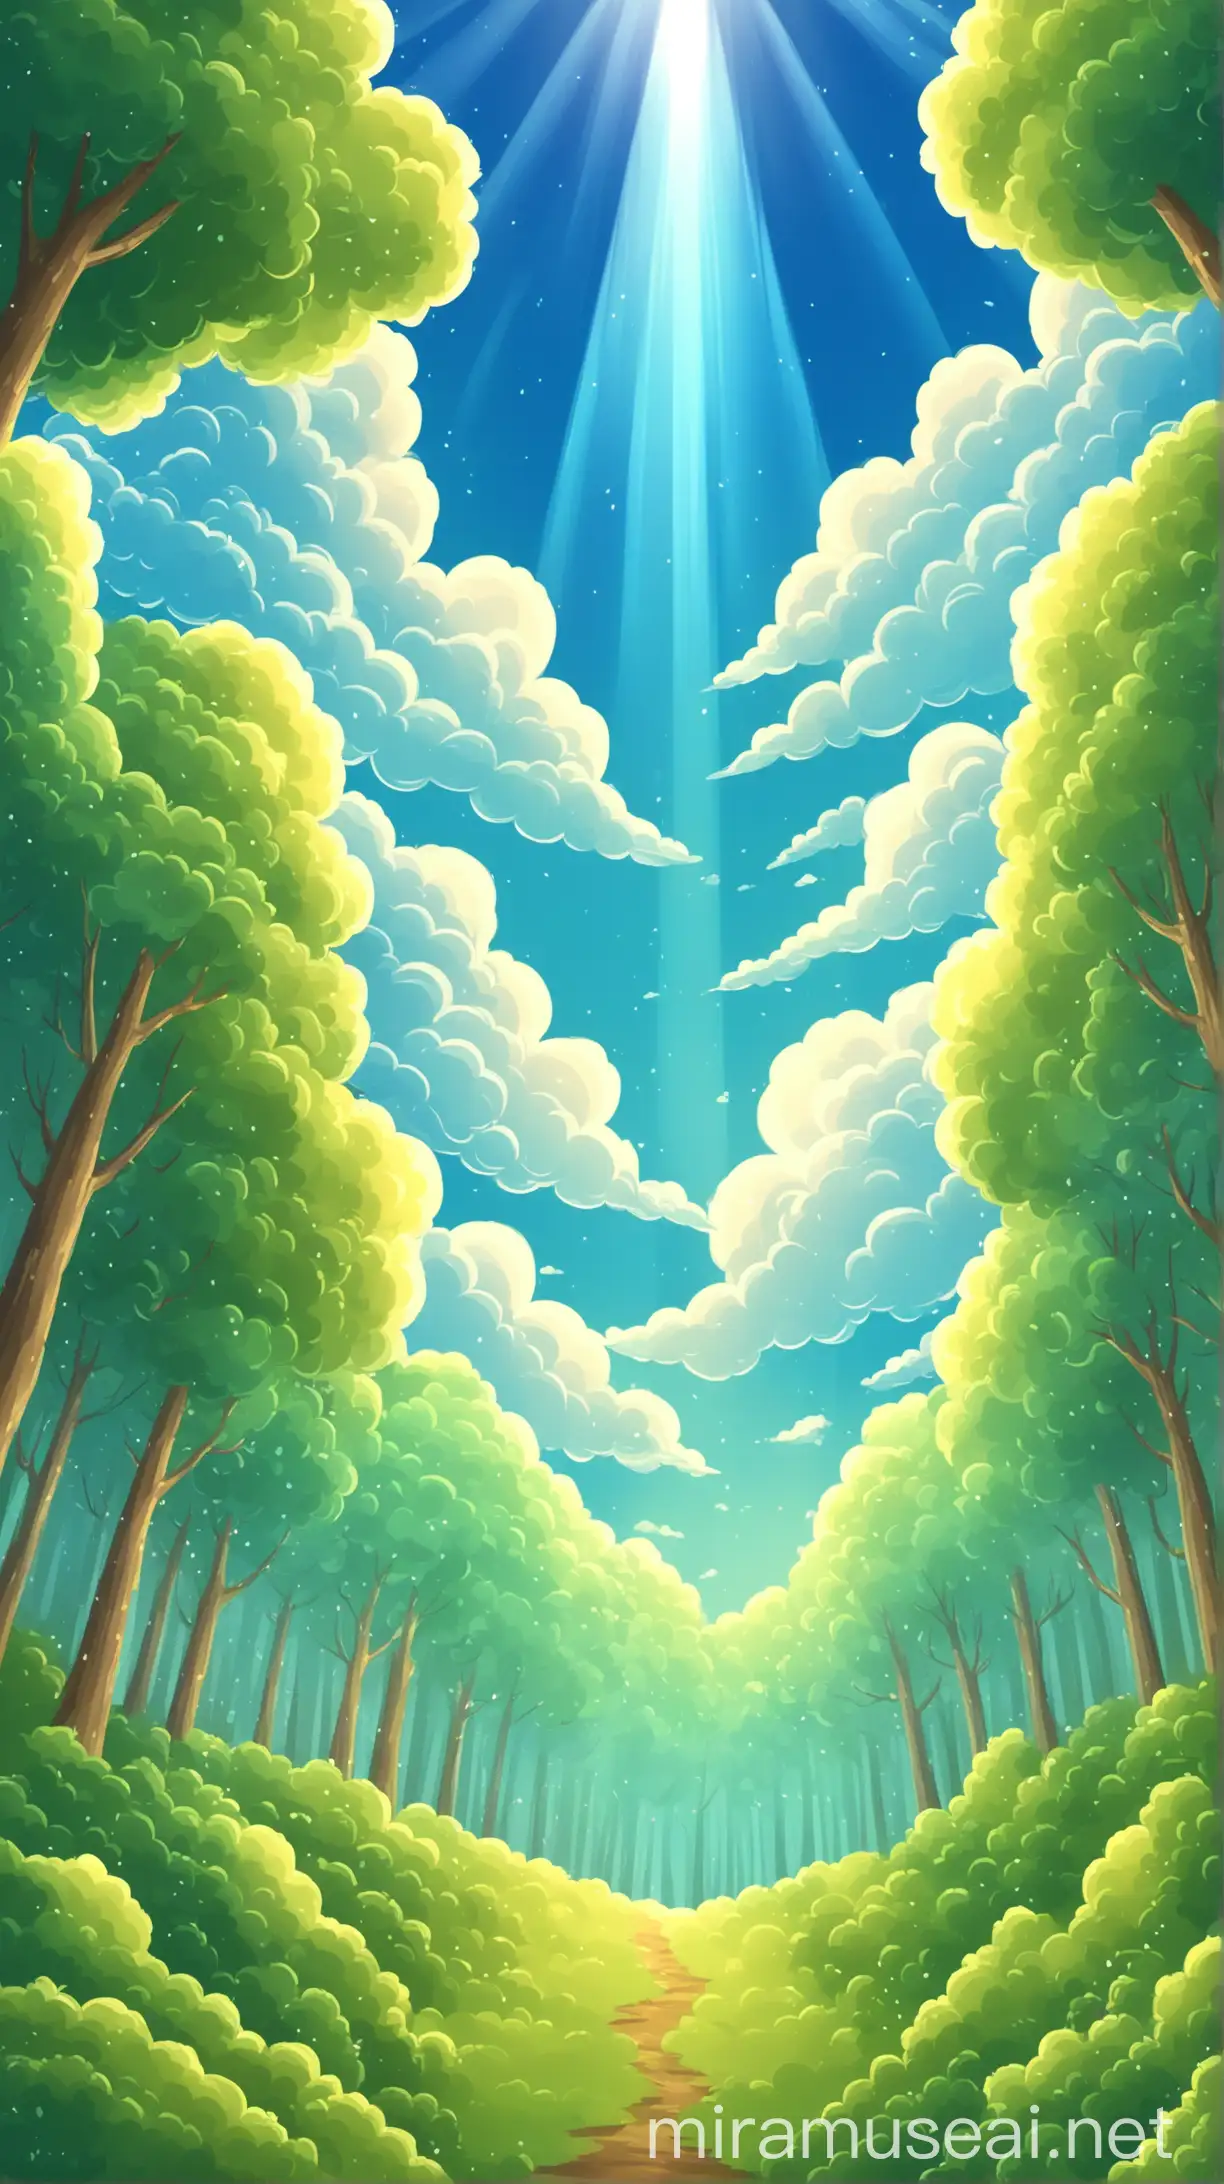 Enchanting Forest Under a Cartoonish Sky Ray of Light Filtering Through Blue Clouds